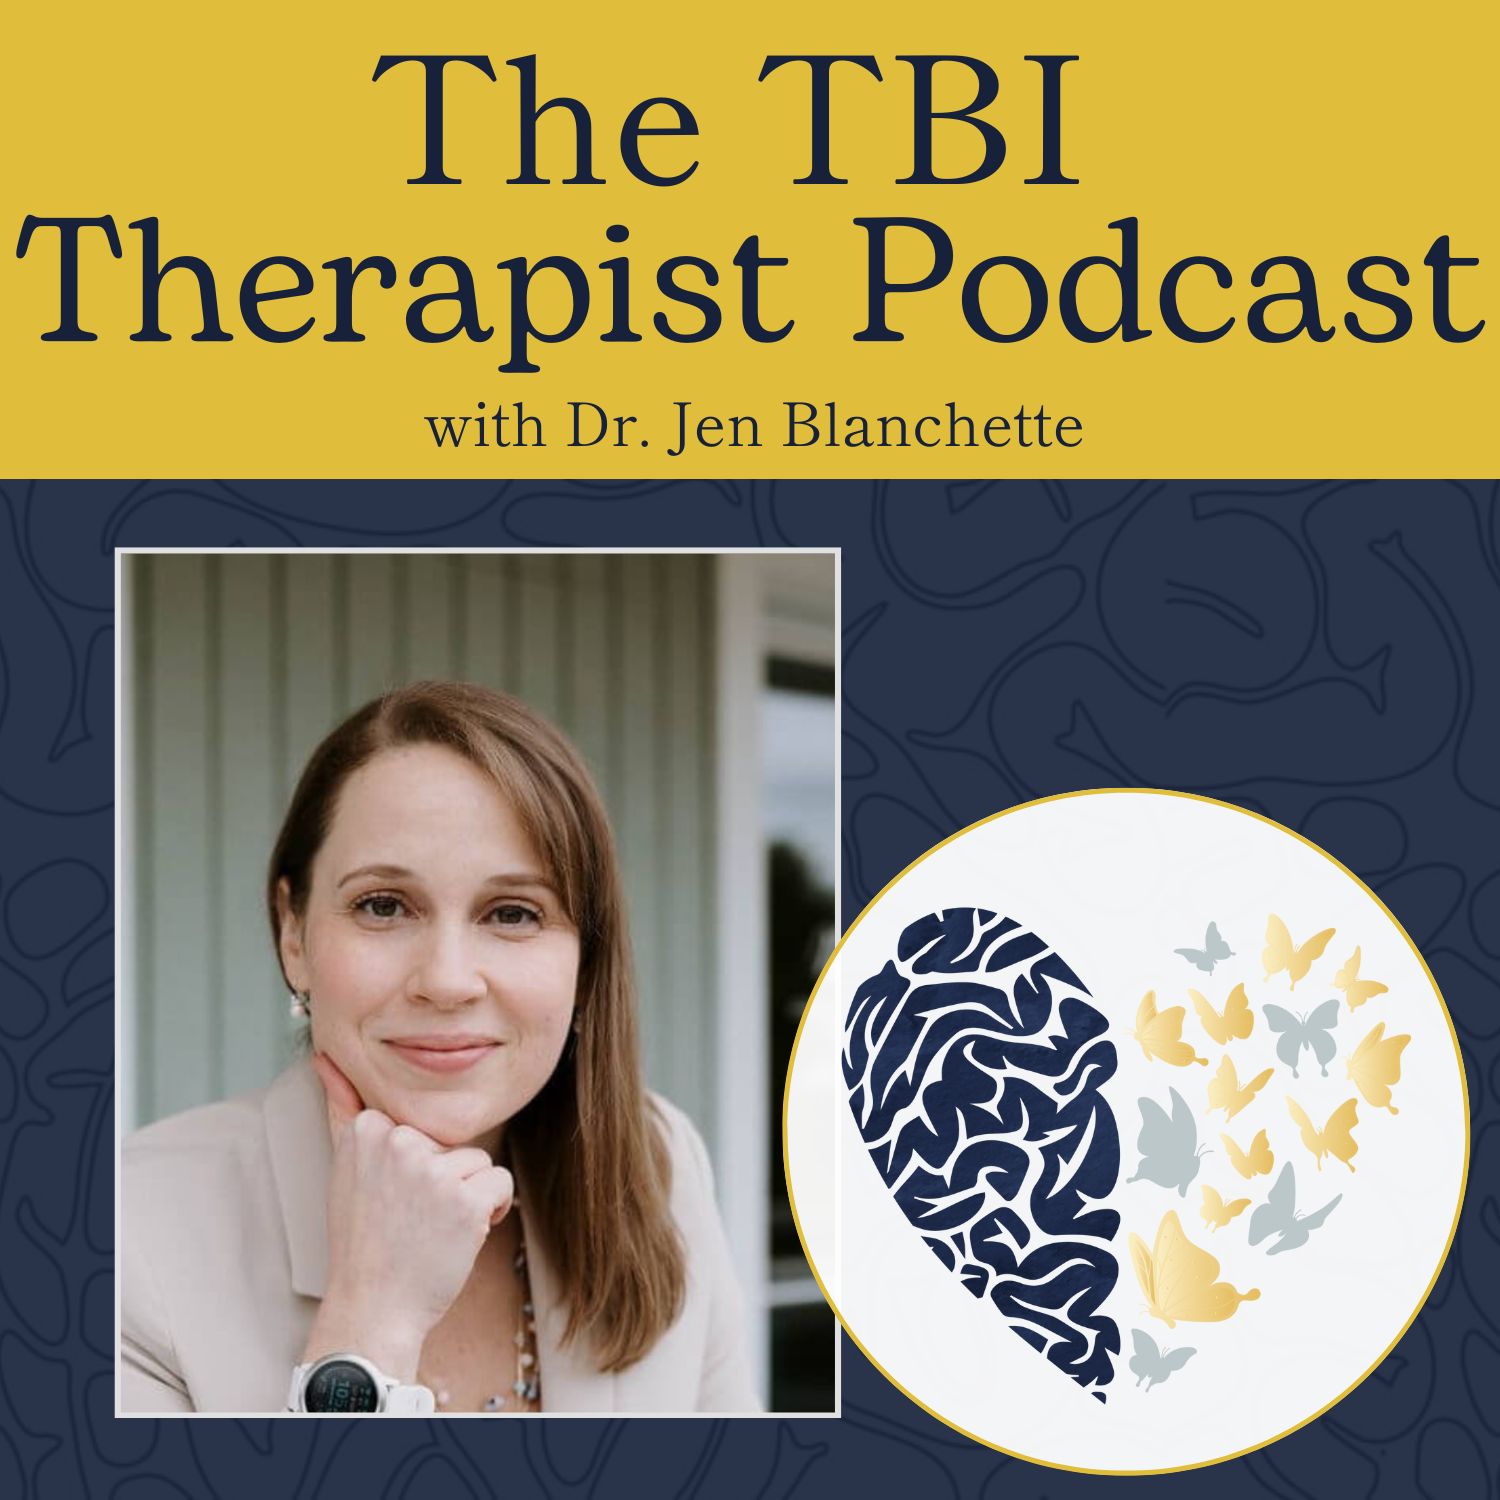 Speech Therapy, Brain Injury, and Mindfulness with Katherine Noyes